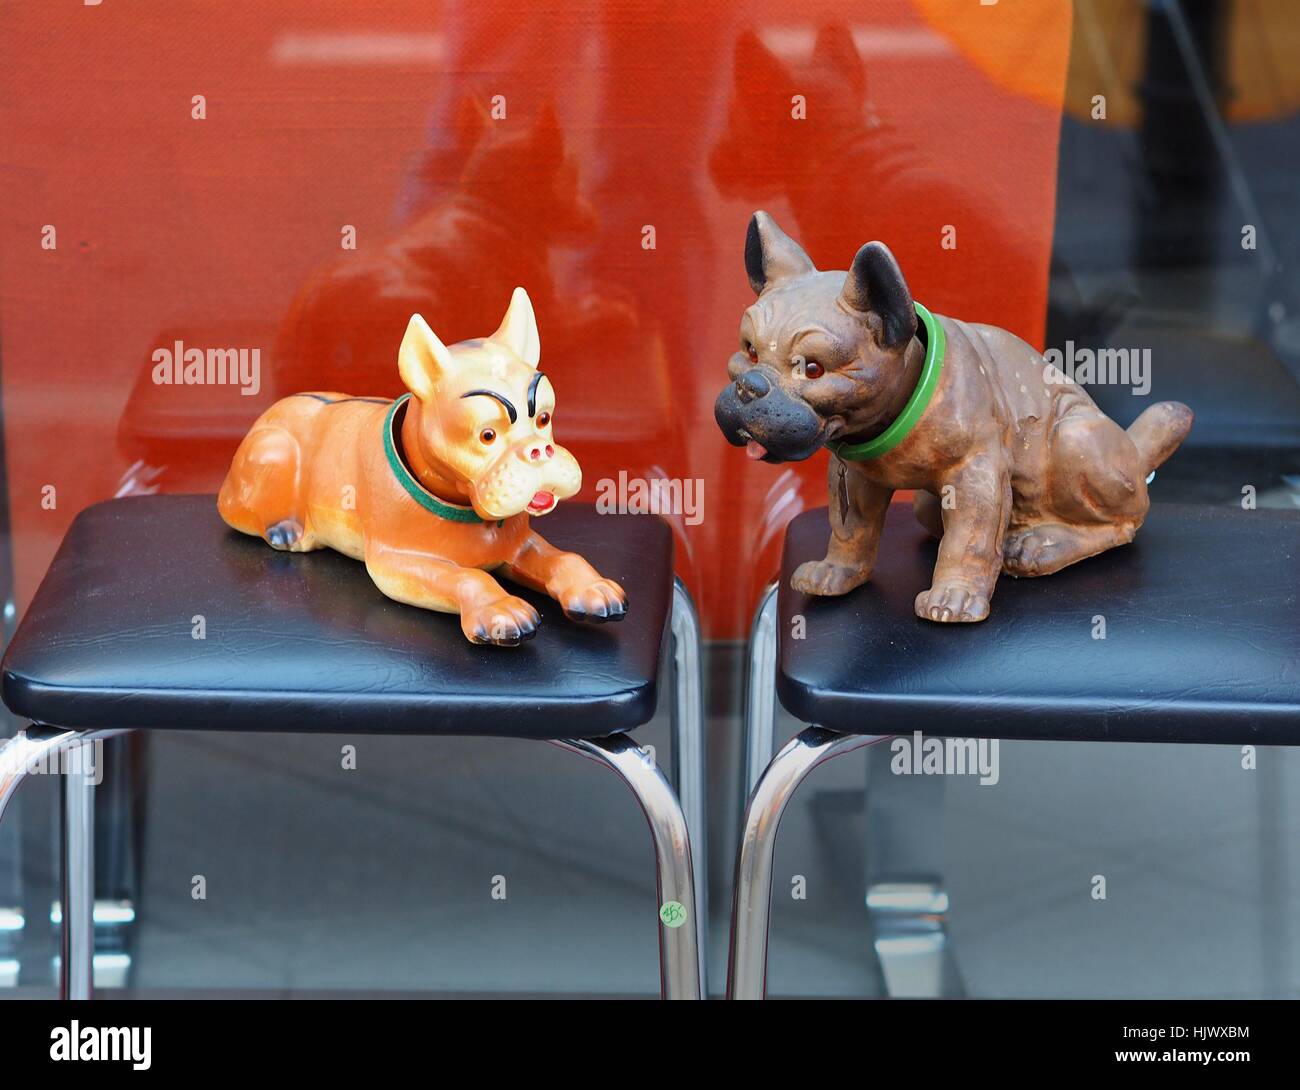 Photo series 'dogs in Berlin' -  Cheese dog figures are seen in the window of a cheap second hand shop in Berlin on February 15, 2016. Berlin is often called the 'capital of dogs'. This picture is part of a long-term project on dogs in Berlin. Photo: Wolfr | usage worldwide Stock Photo